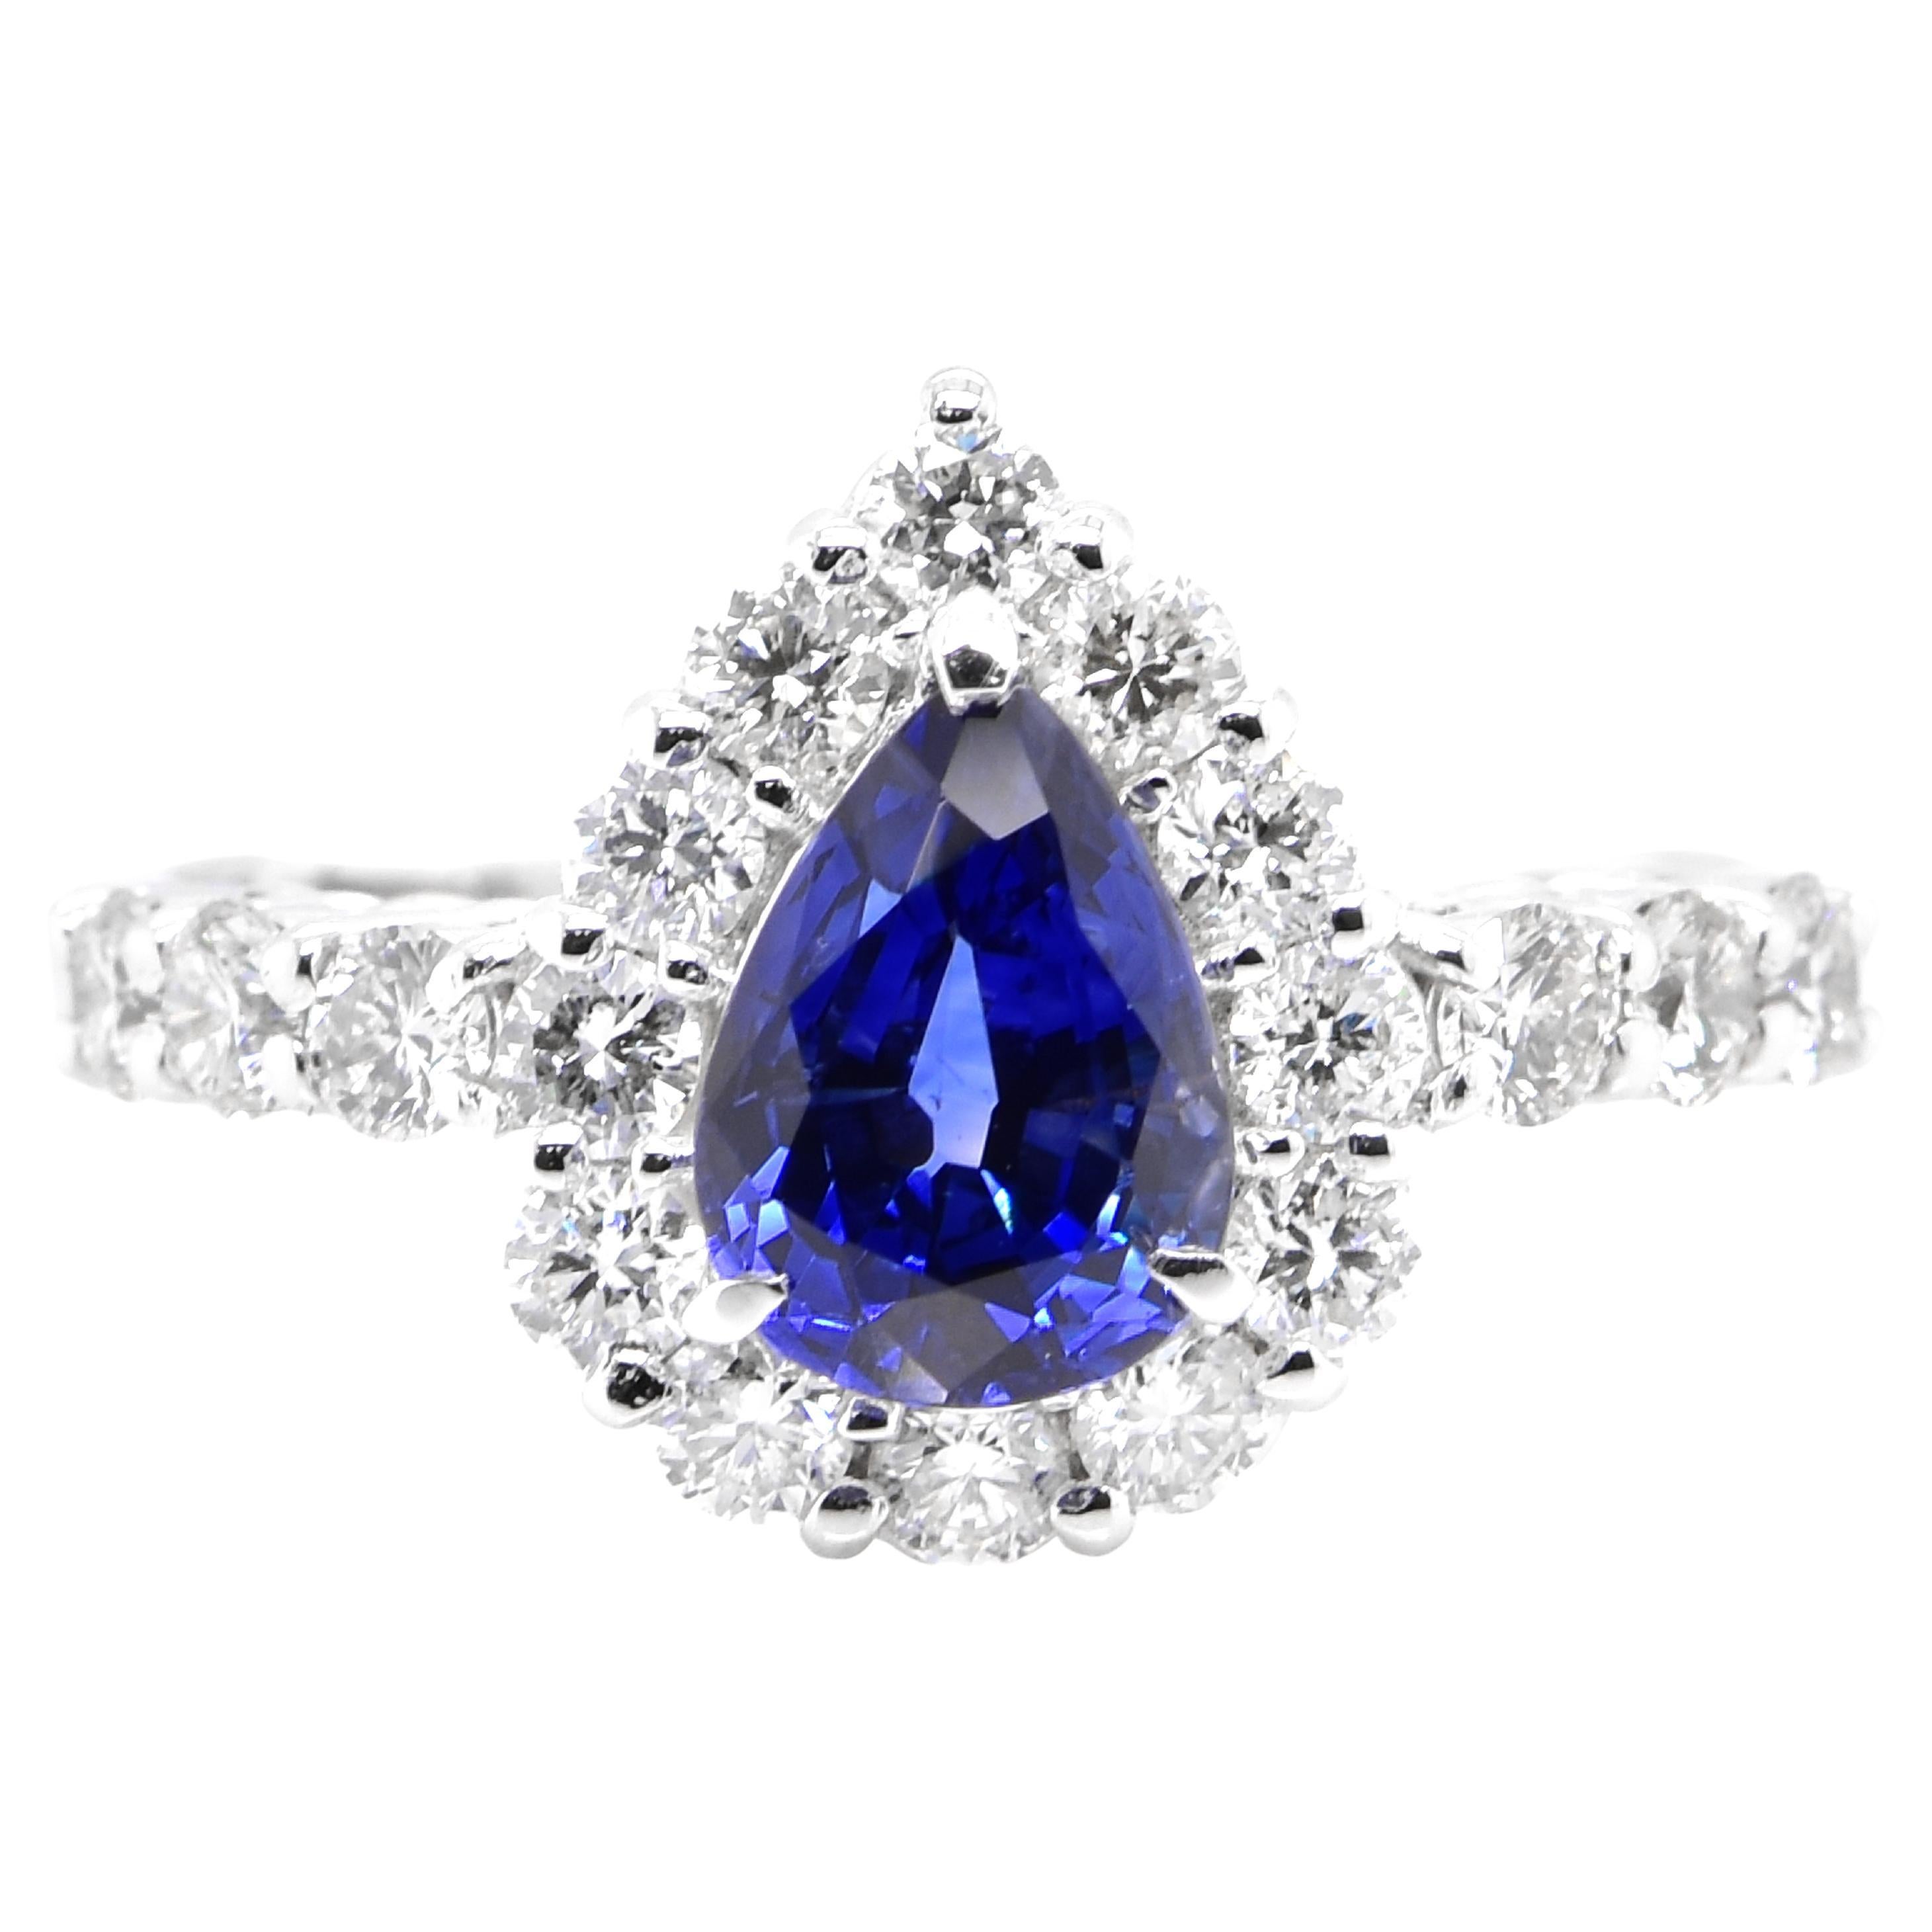 1.50 Carat Natural Royal Blue Color Sapphire and Diamond Ring Made in Platinum